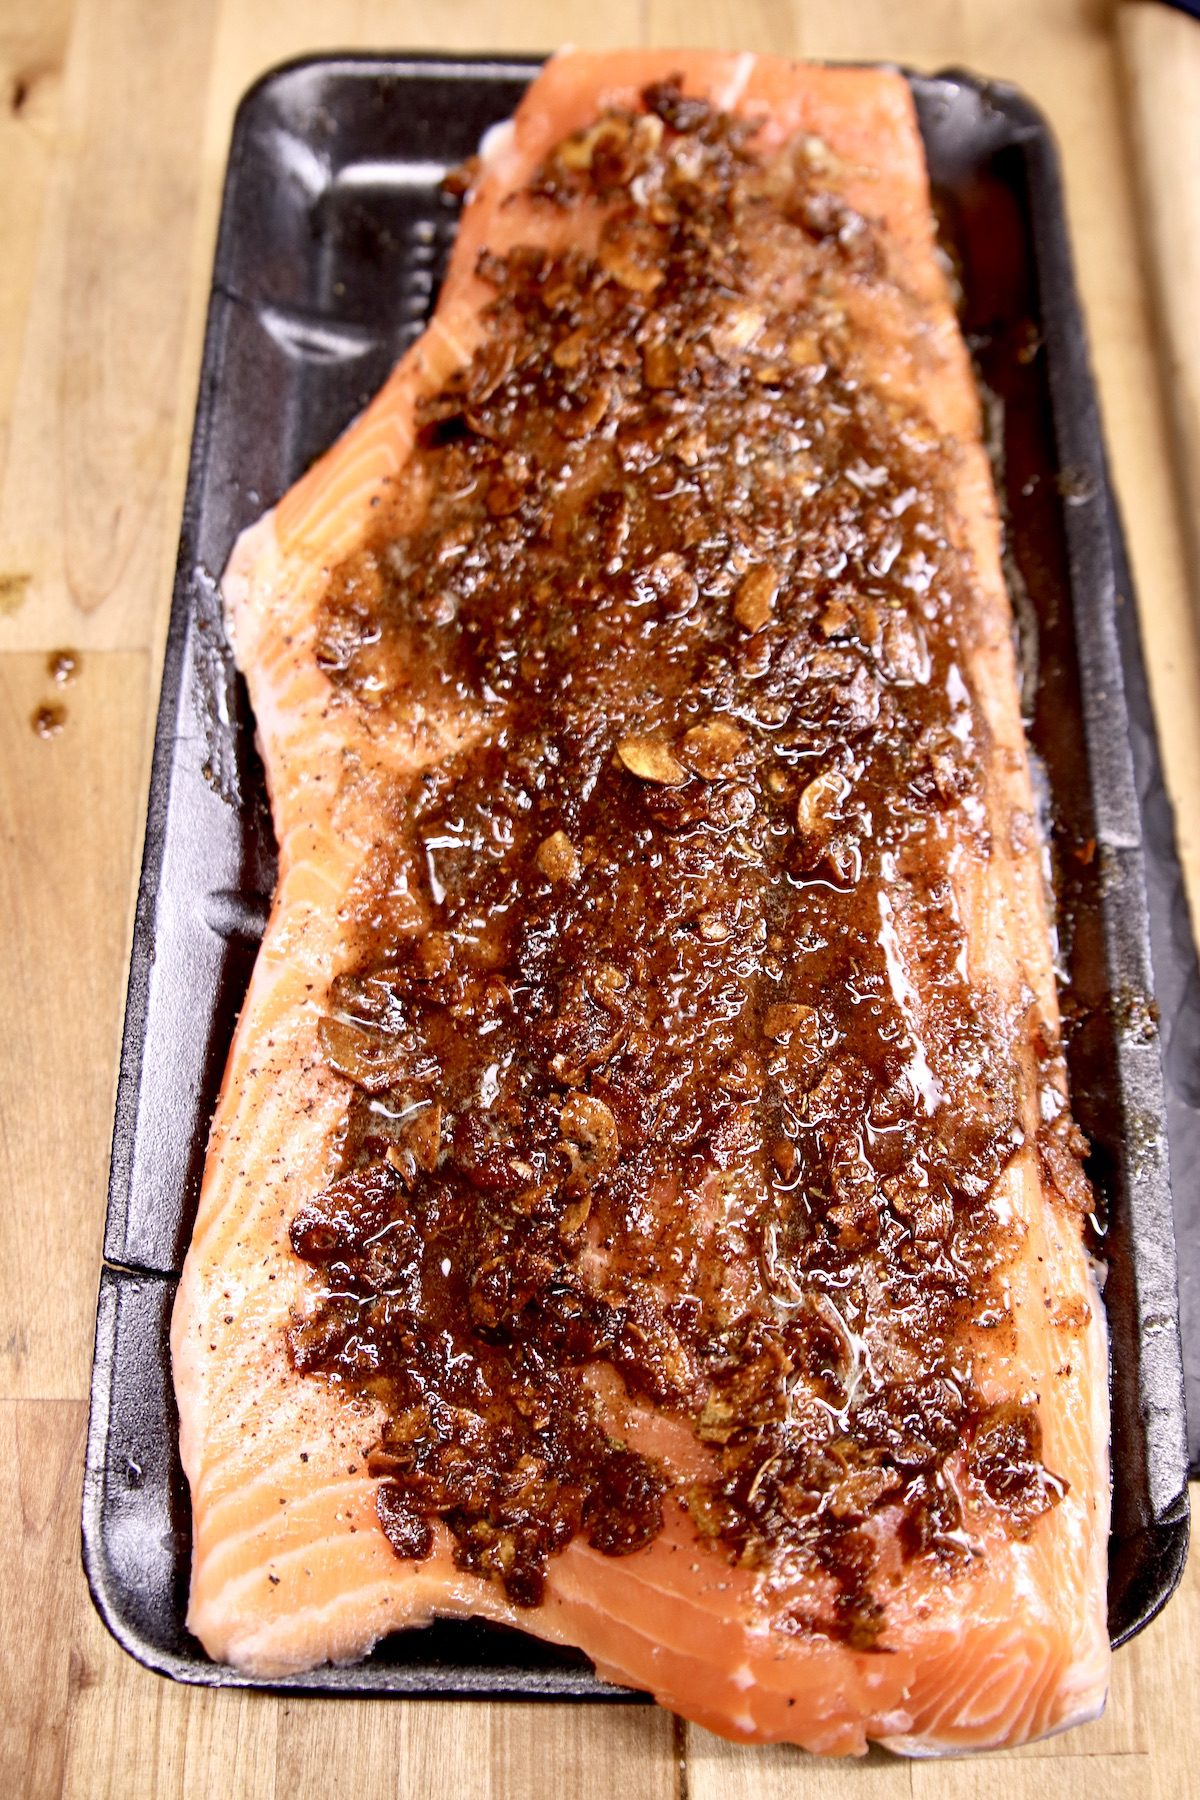 garlic butter coated salmon fillet ready to grill